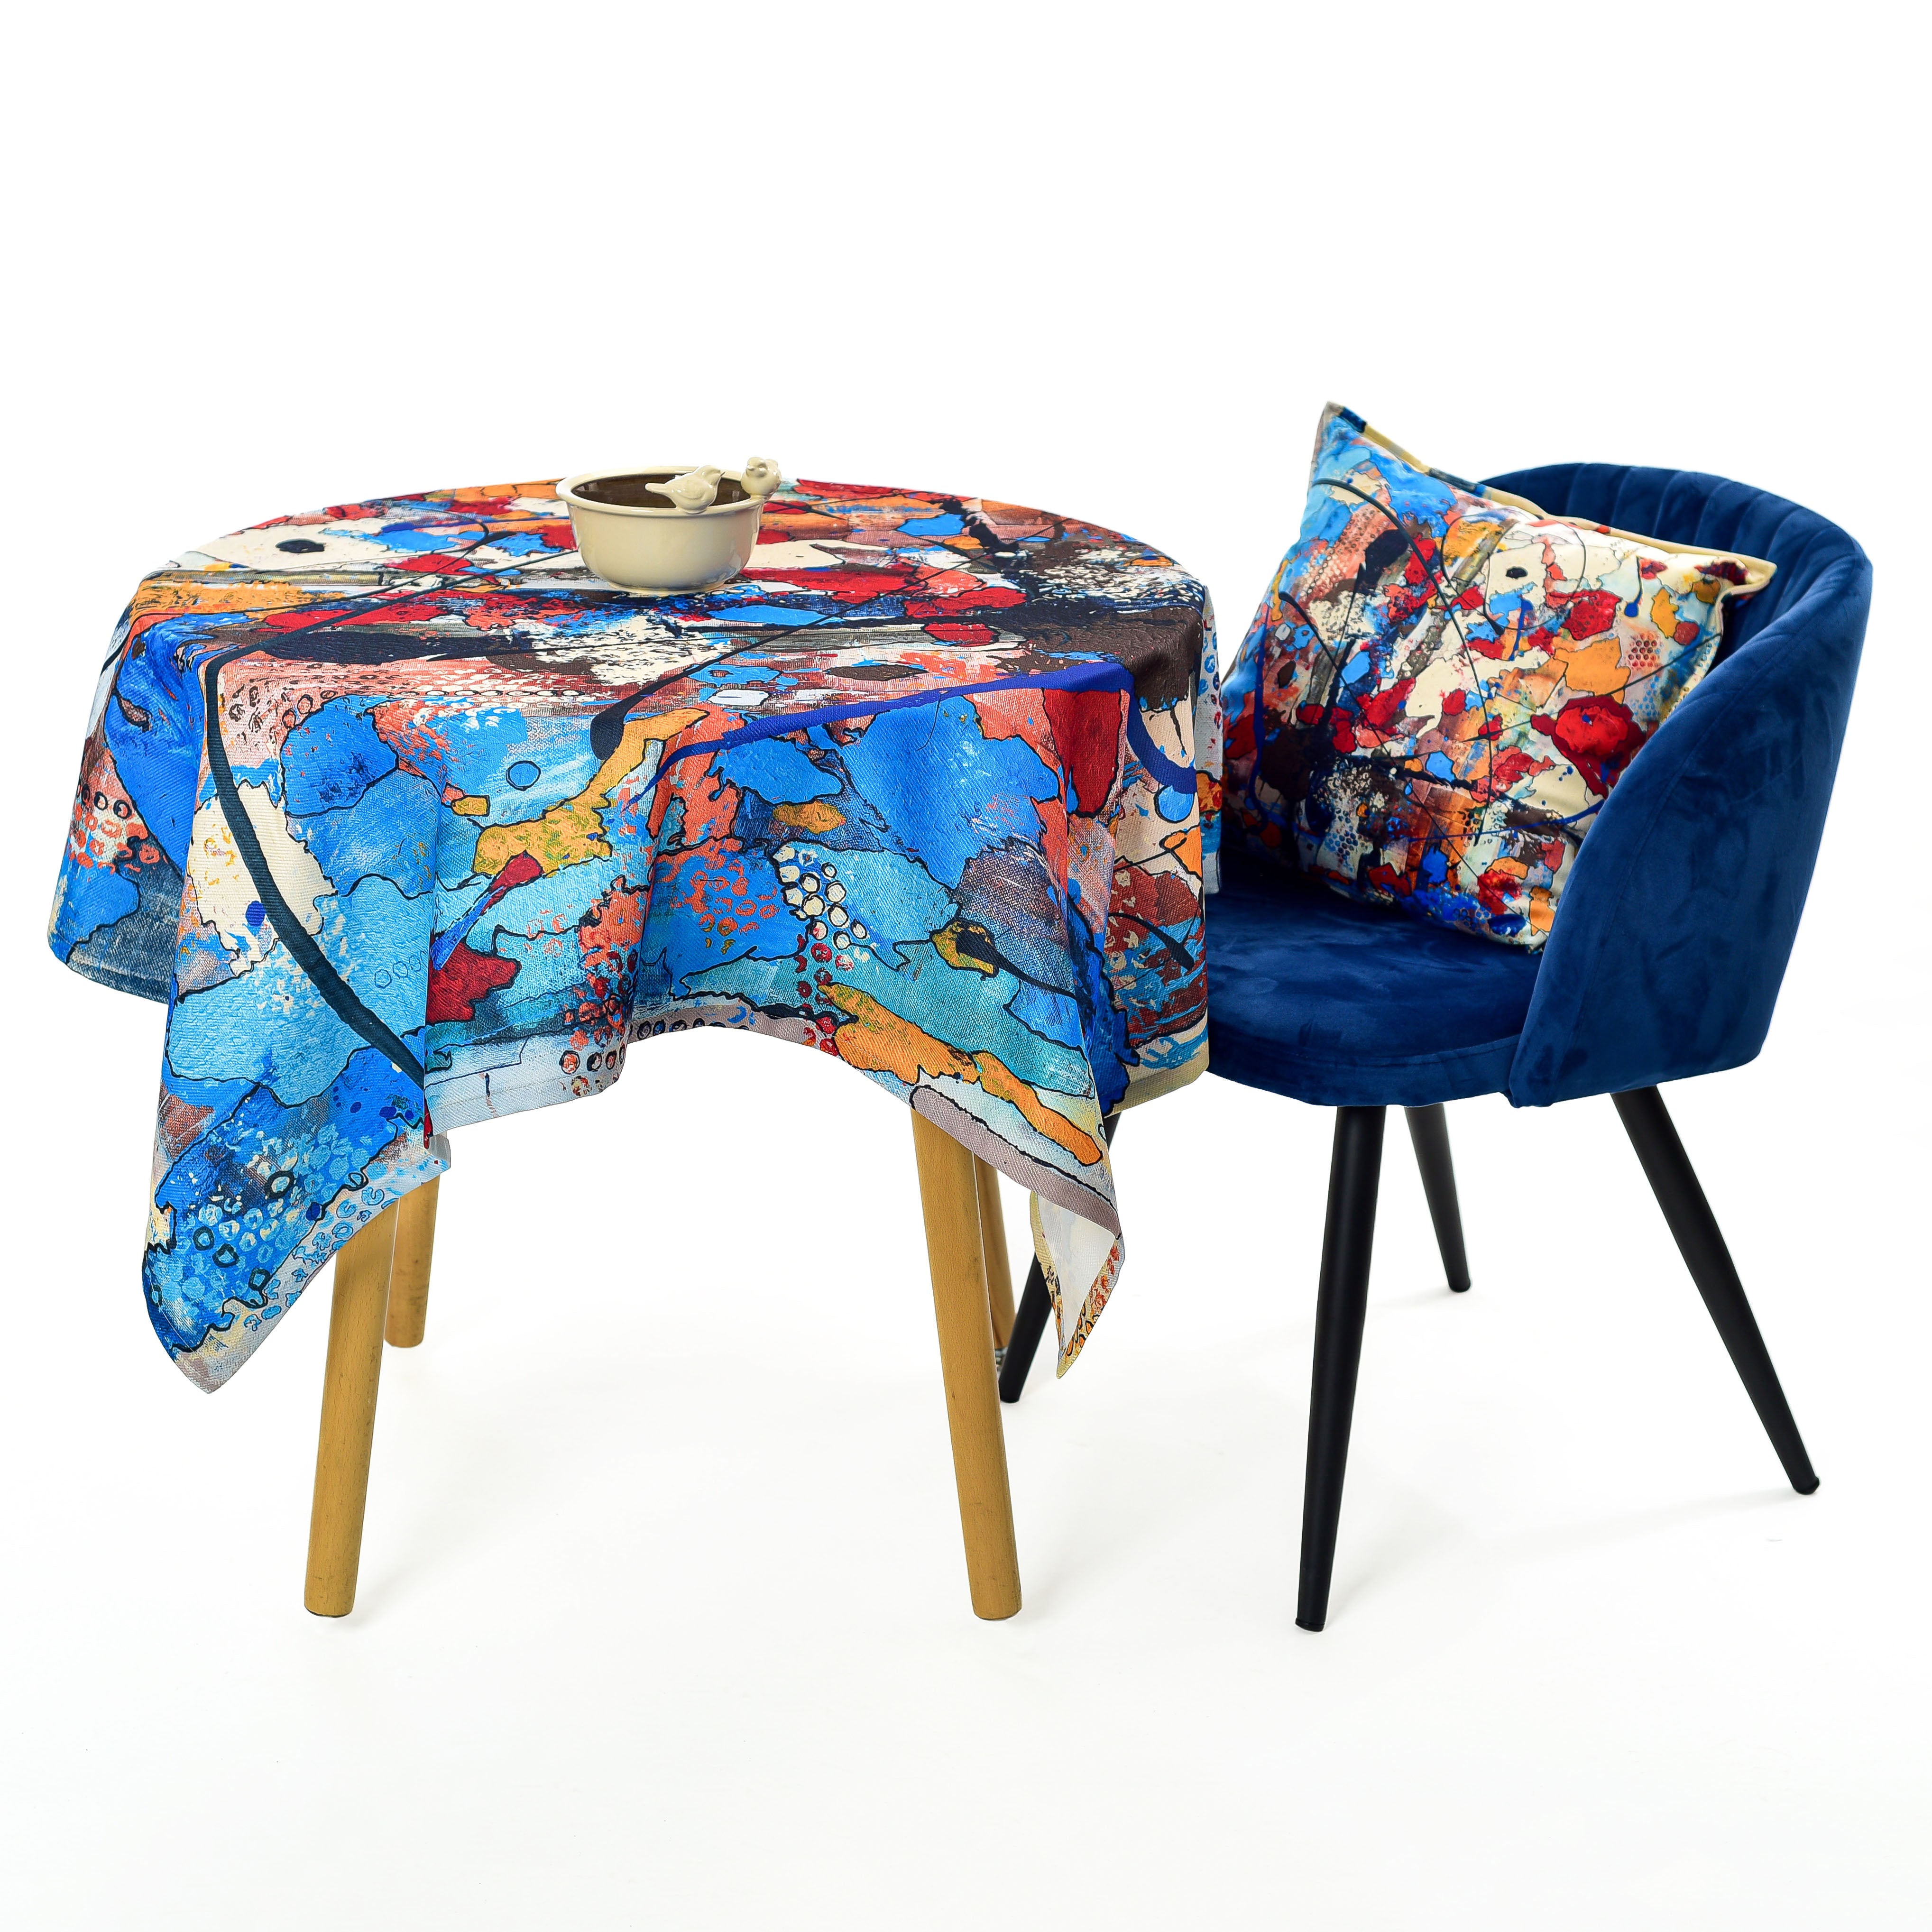 Tablecloth made of recycled fabric NeriusART "Unexpected Points"